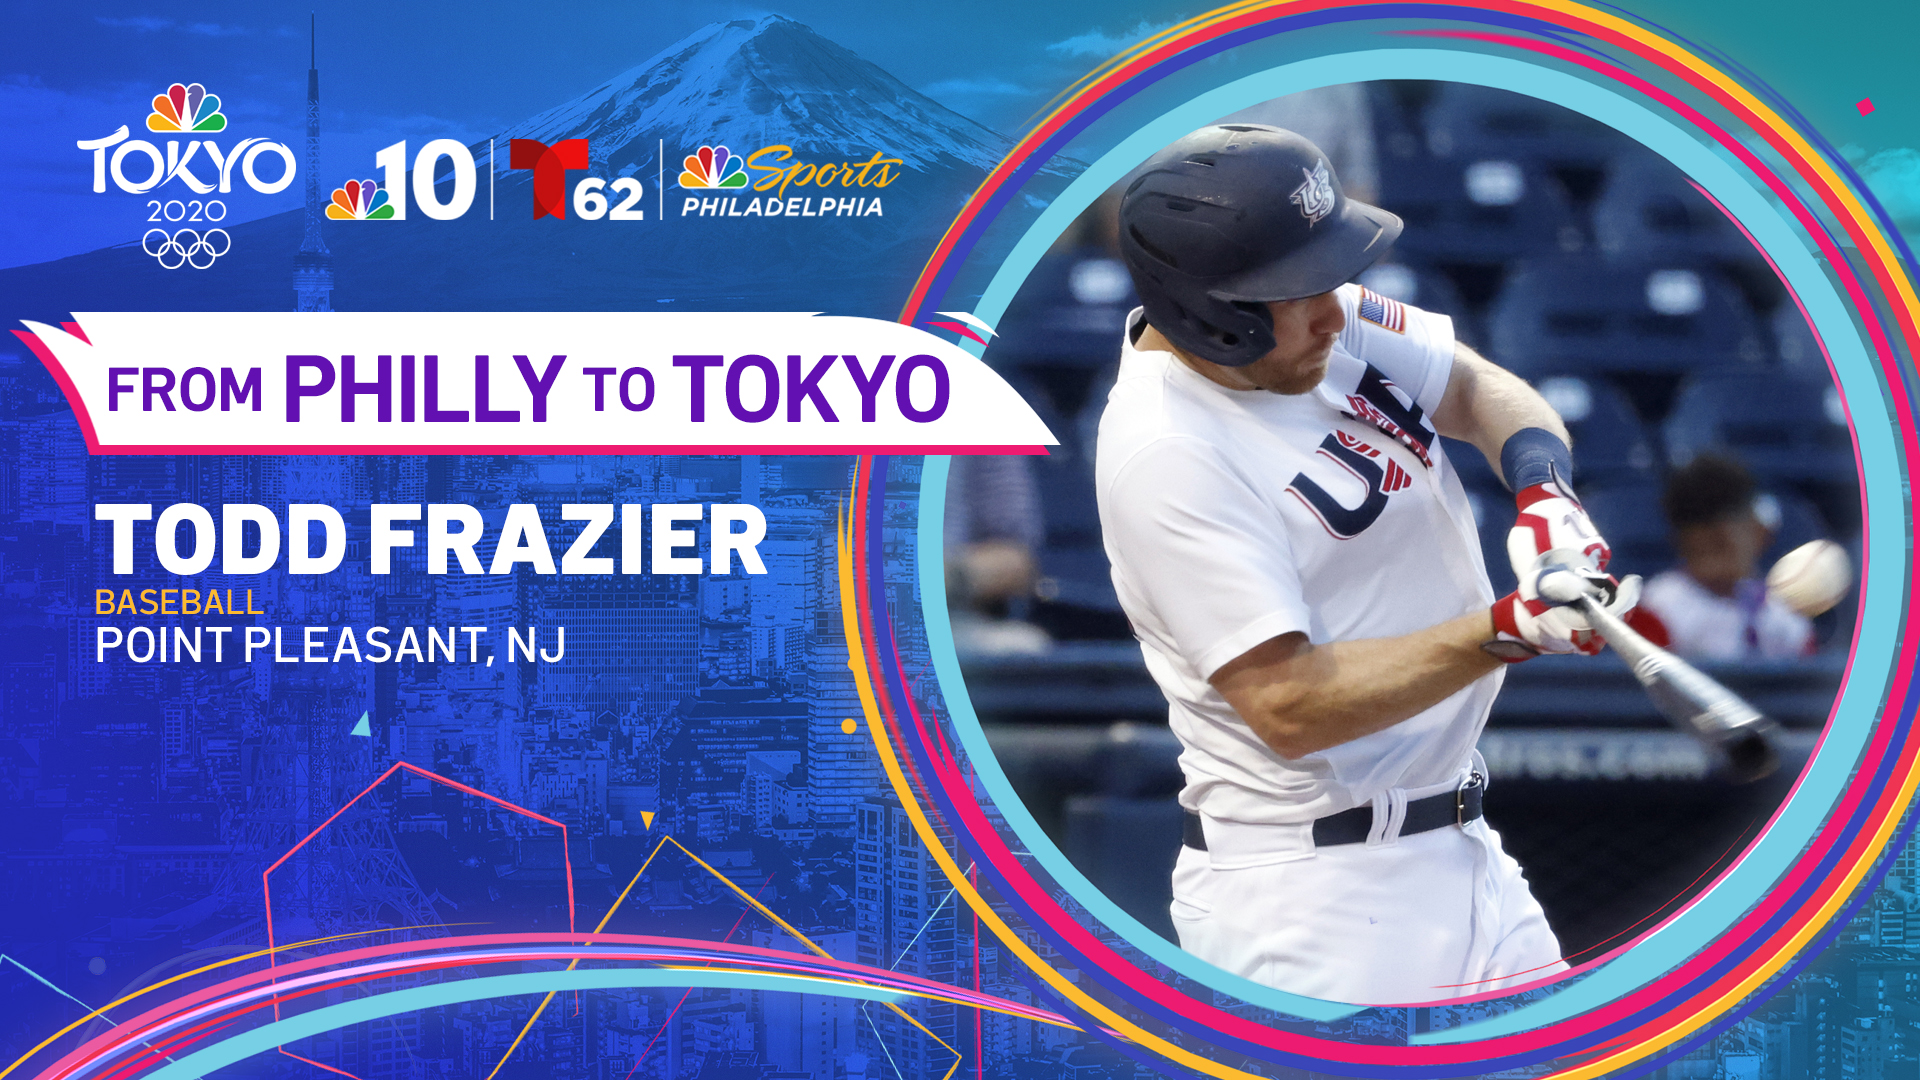 Former Yankees and Mets player Todd Frazier Going for the Gold in Tokyo 